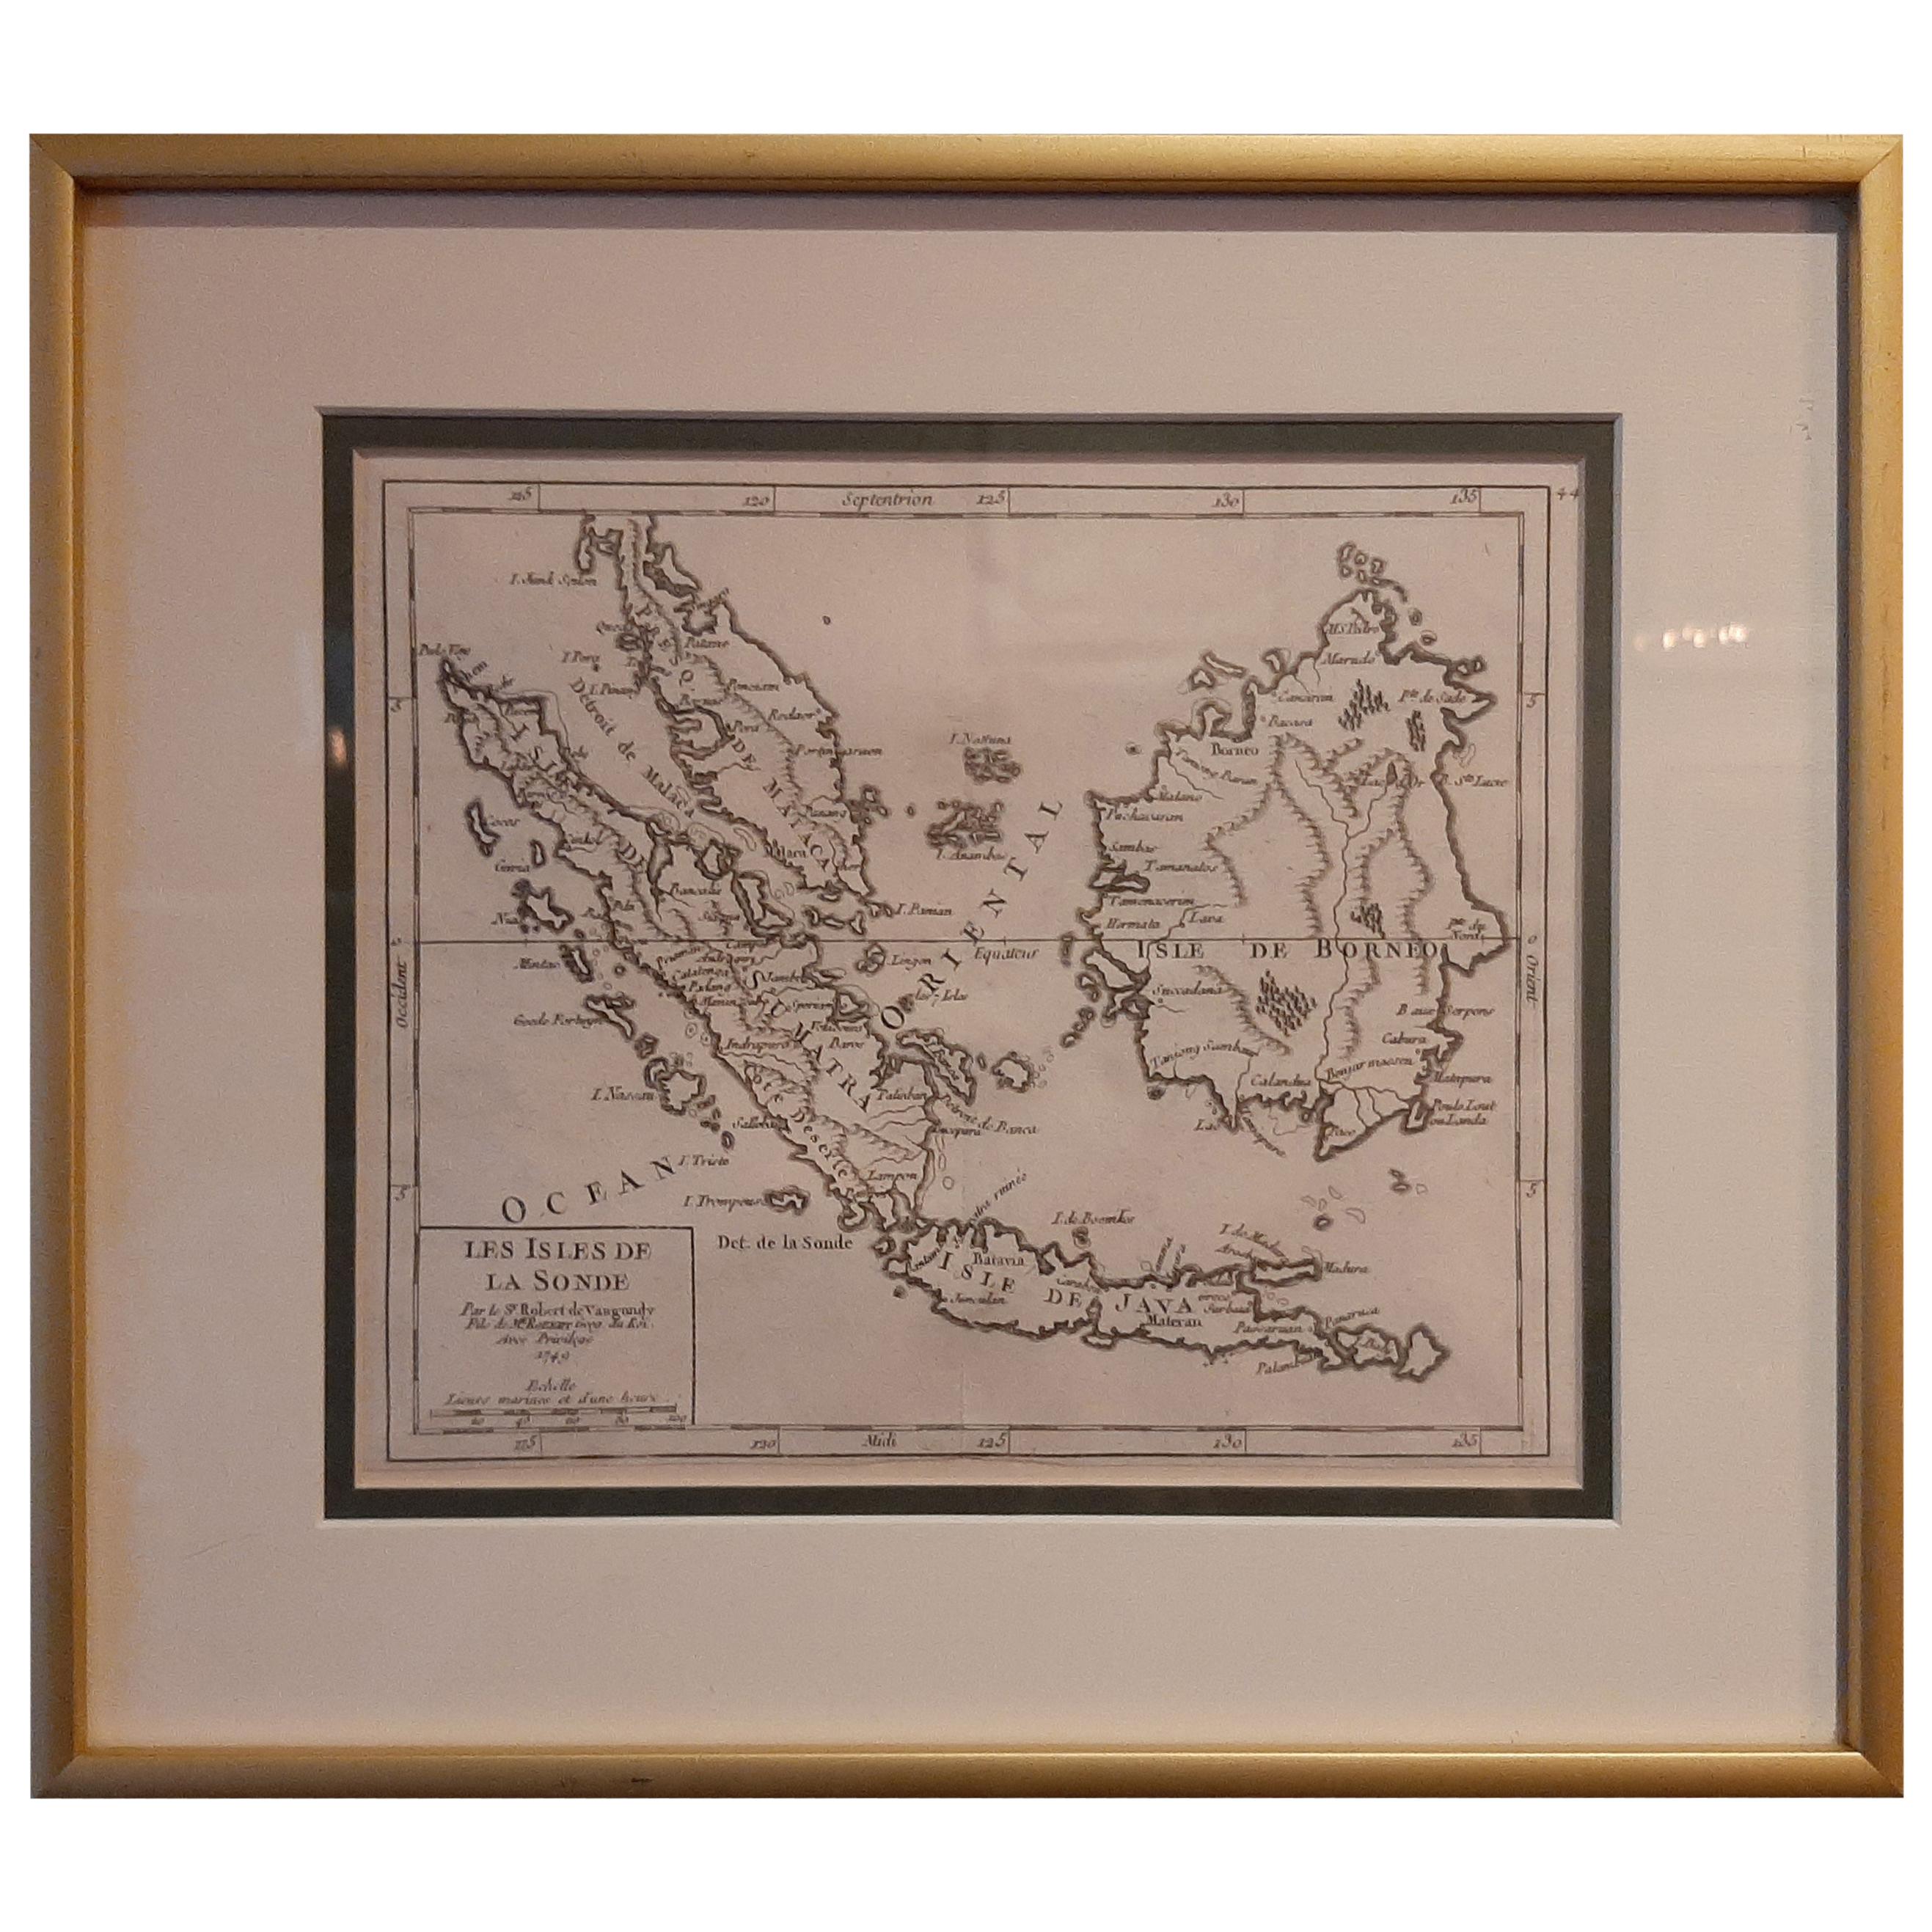 Antique Map of Indonesia and Malaysia by Vaugondy, 1749